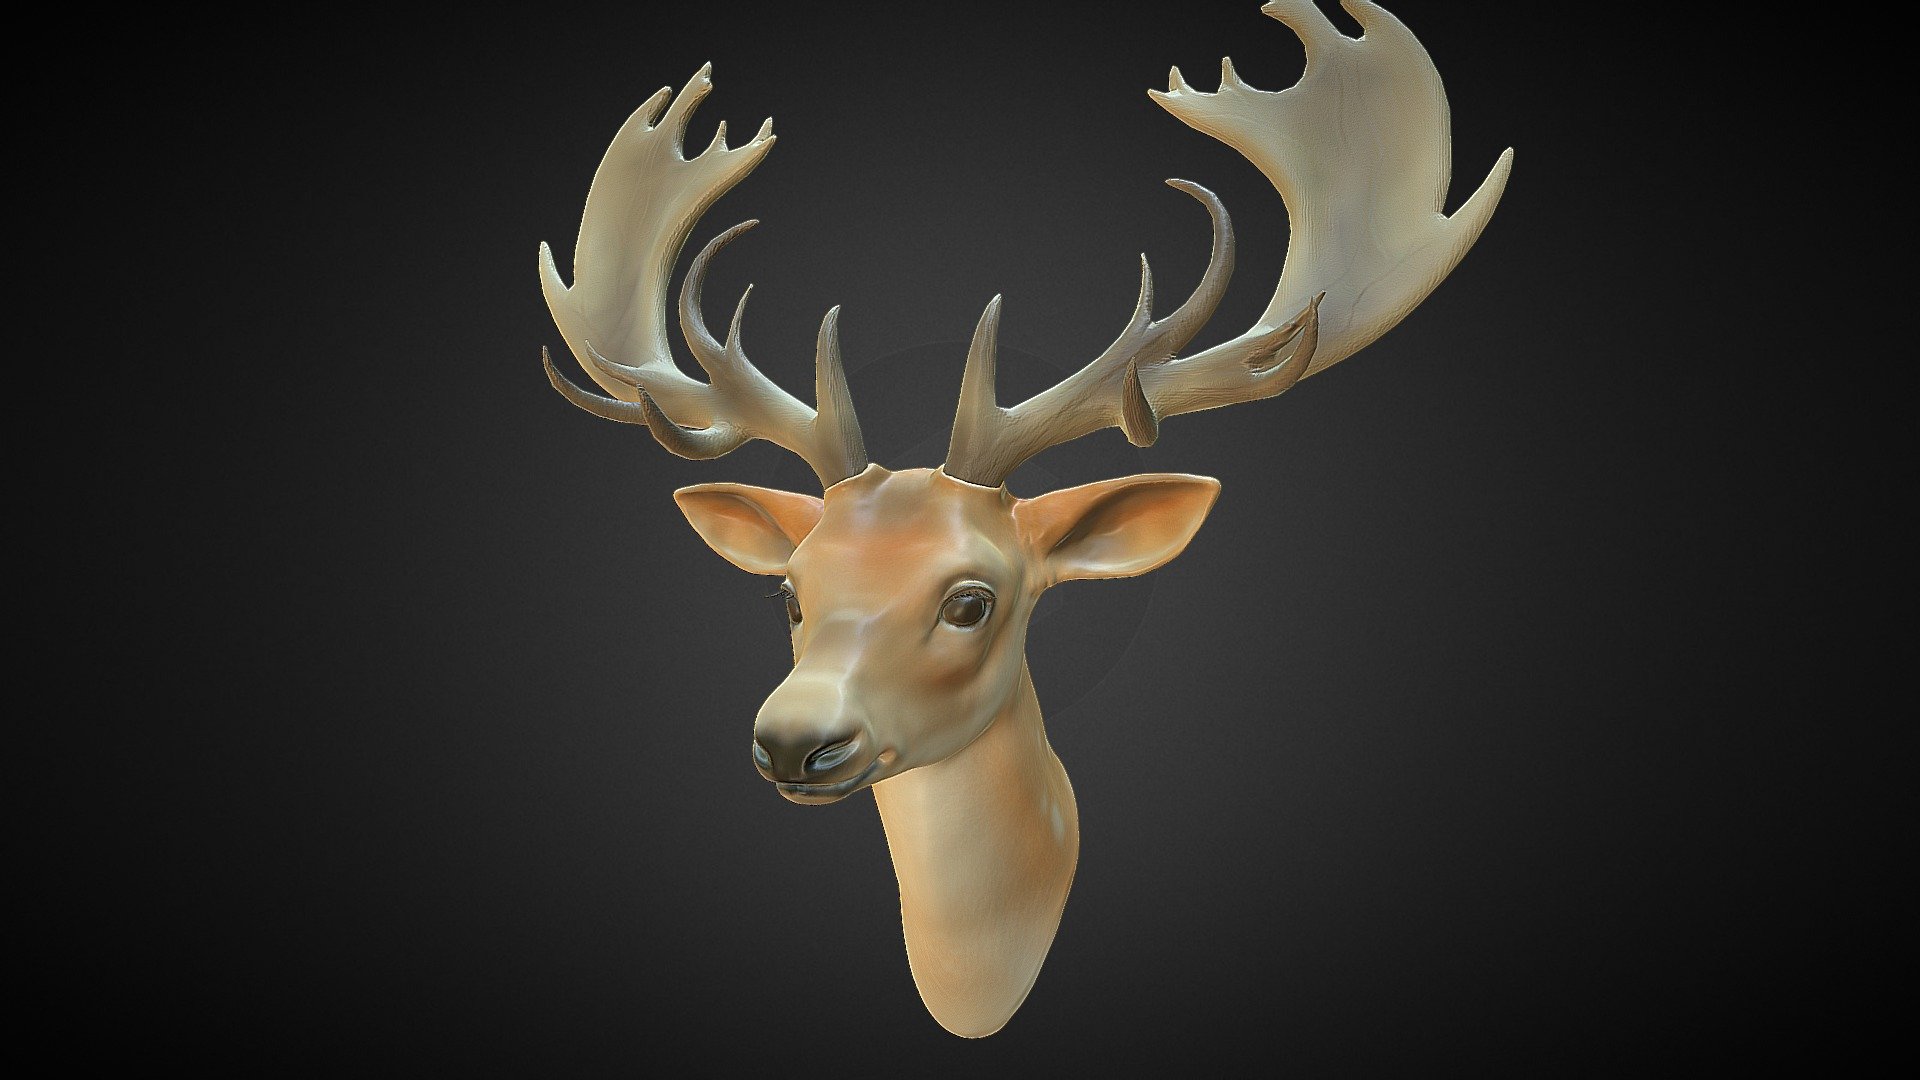 Sculpted in Zbrush 3d model